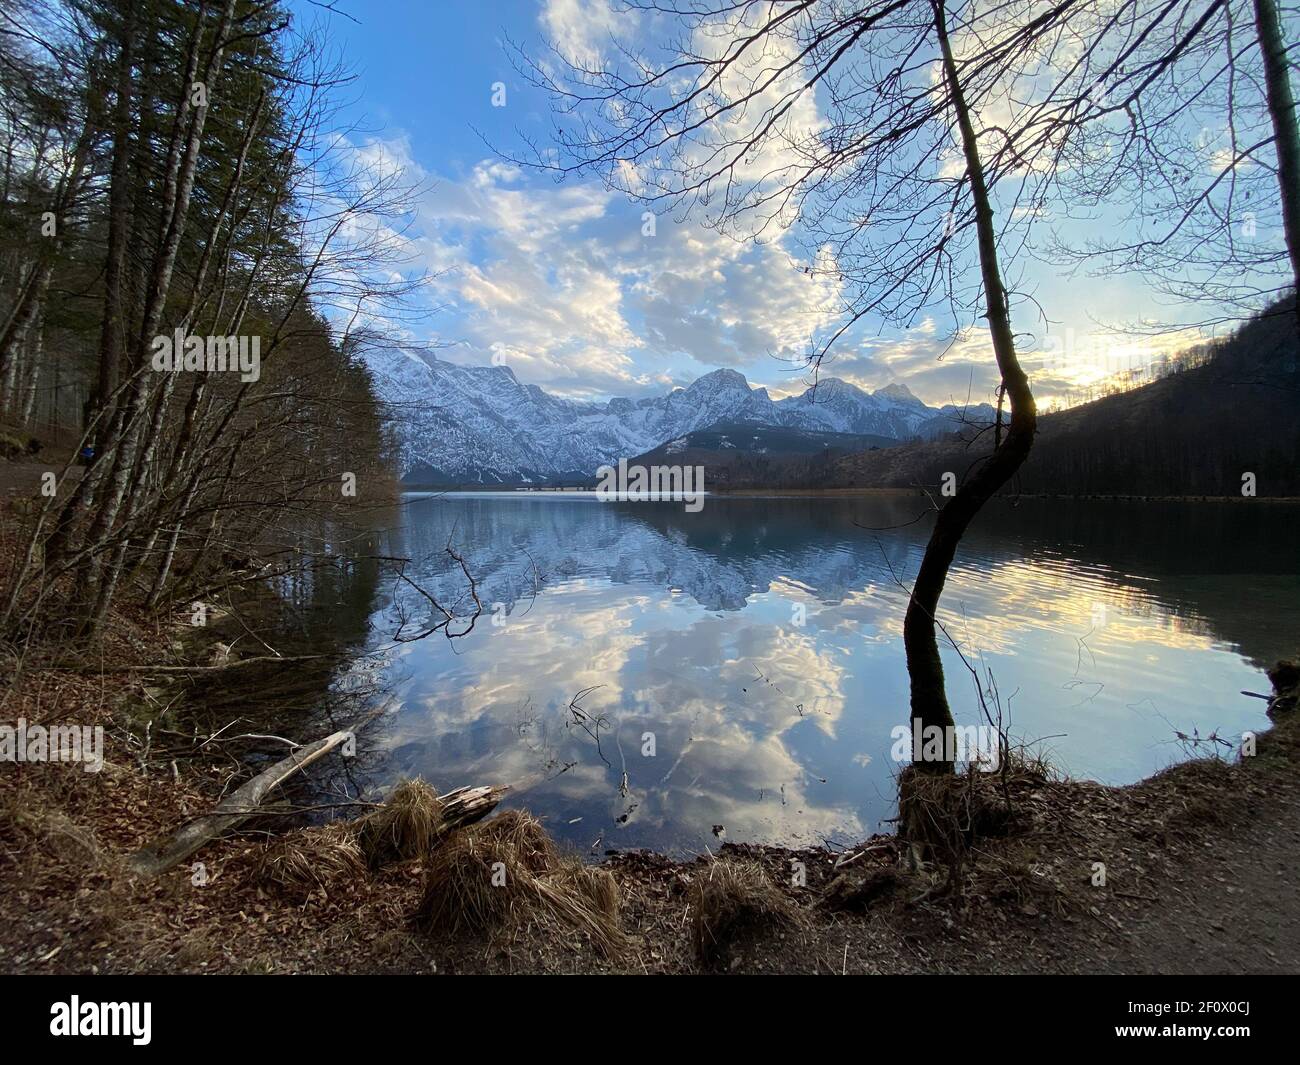 Reflections of a sunset over alpine mountain lake Almsee in Austria Stock Photo